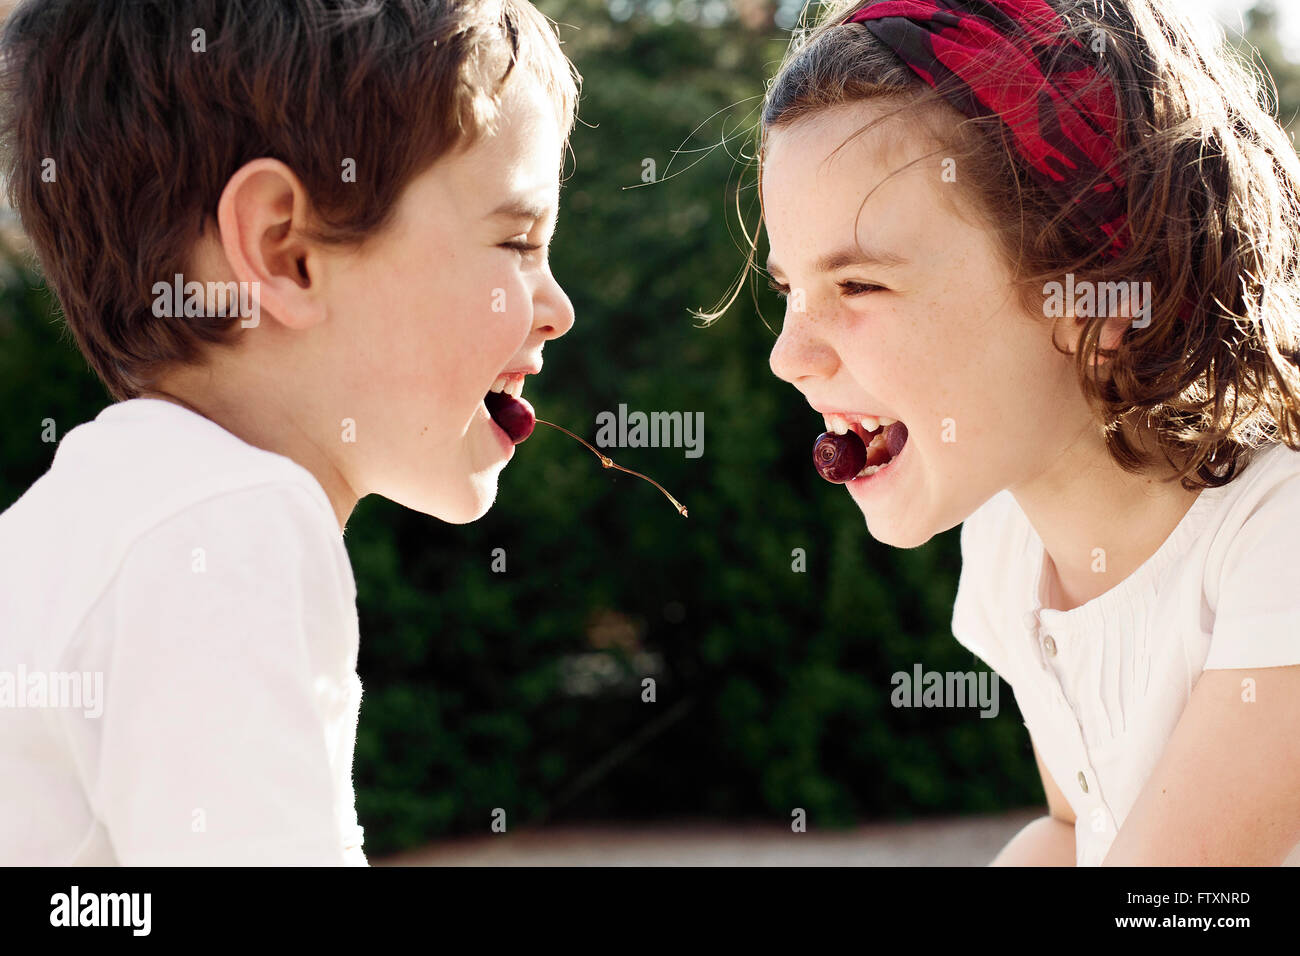 Boy and girl face to face eating cherries Stock Photo